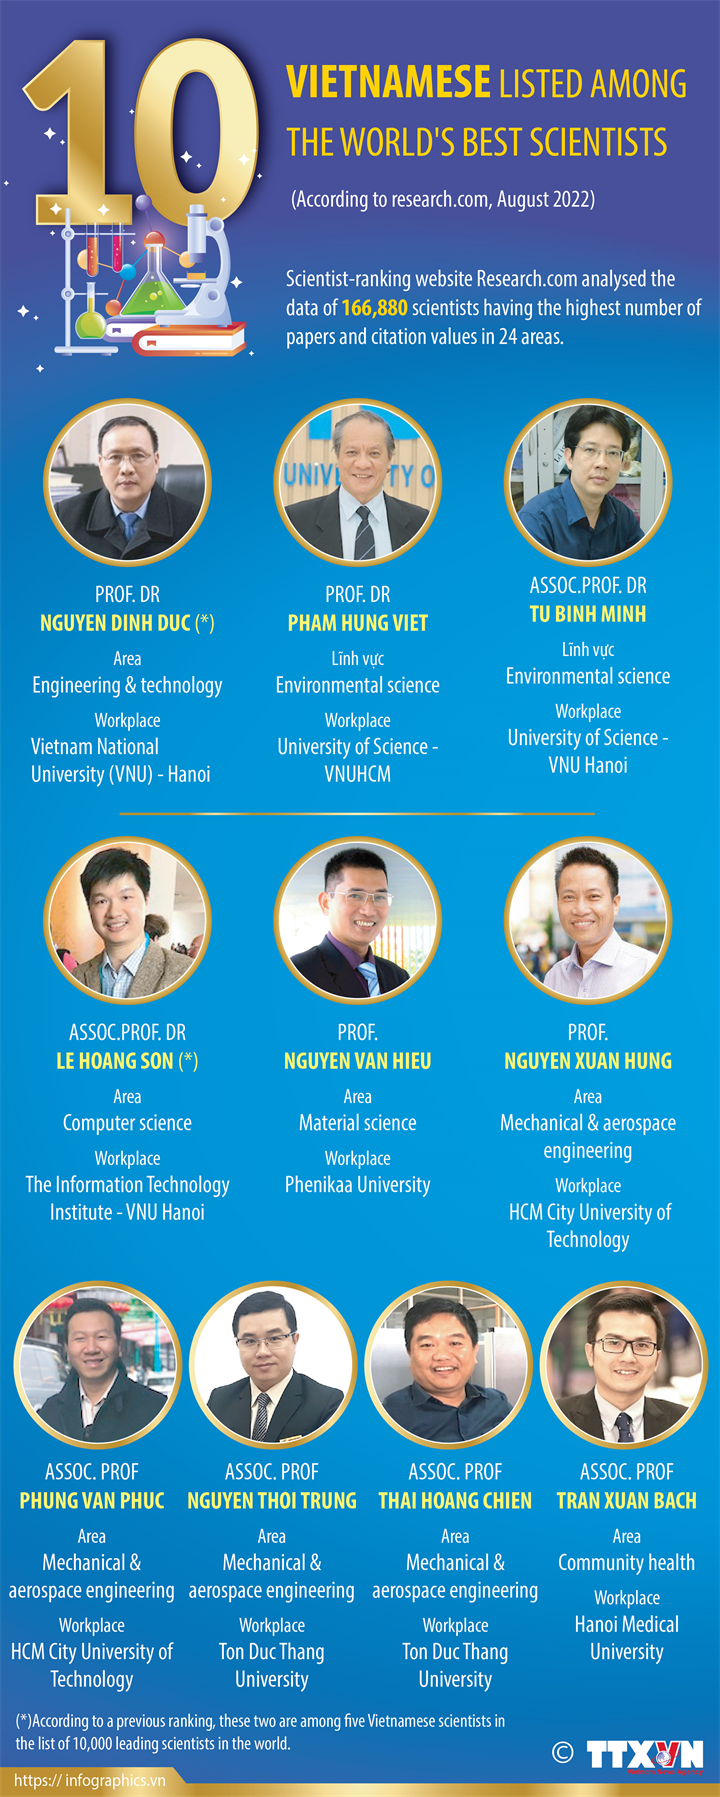 Ten Vietnamese listed among the world's best scientists